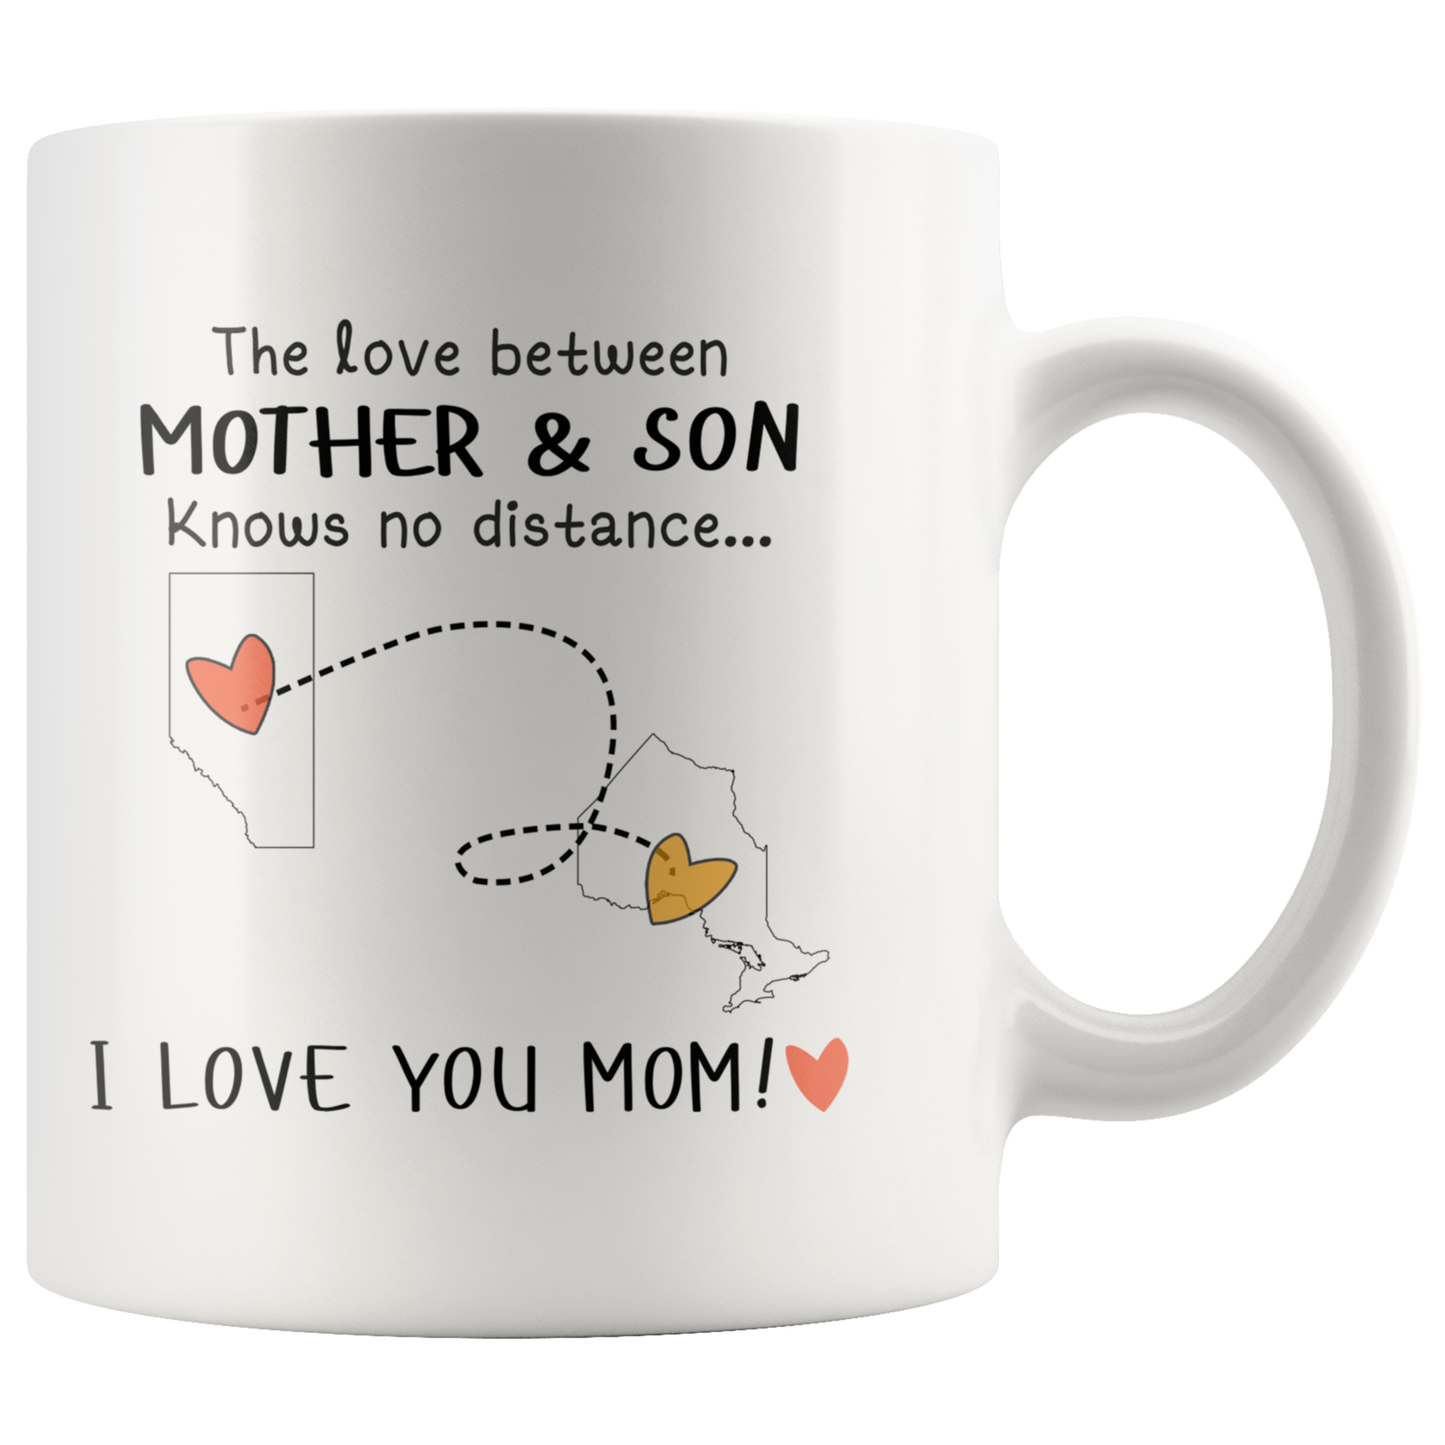 MUG0120547161-sp-19055 - Mothers Day Gifts from Son - The Love Between Mother and So